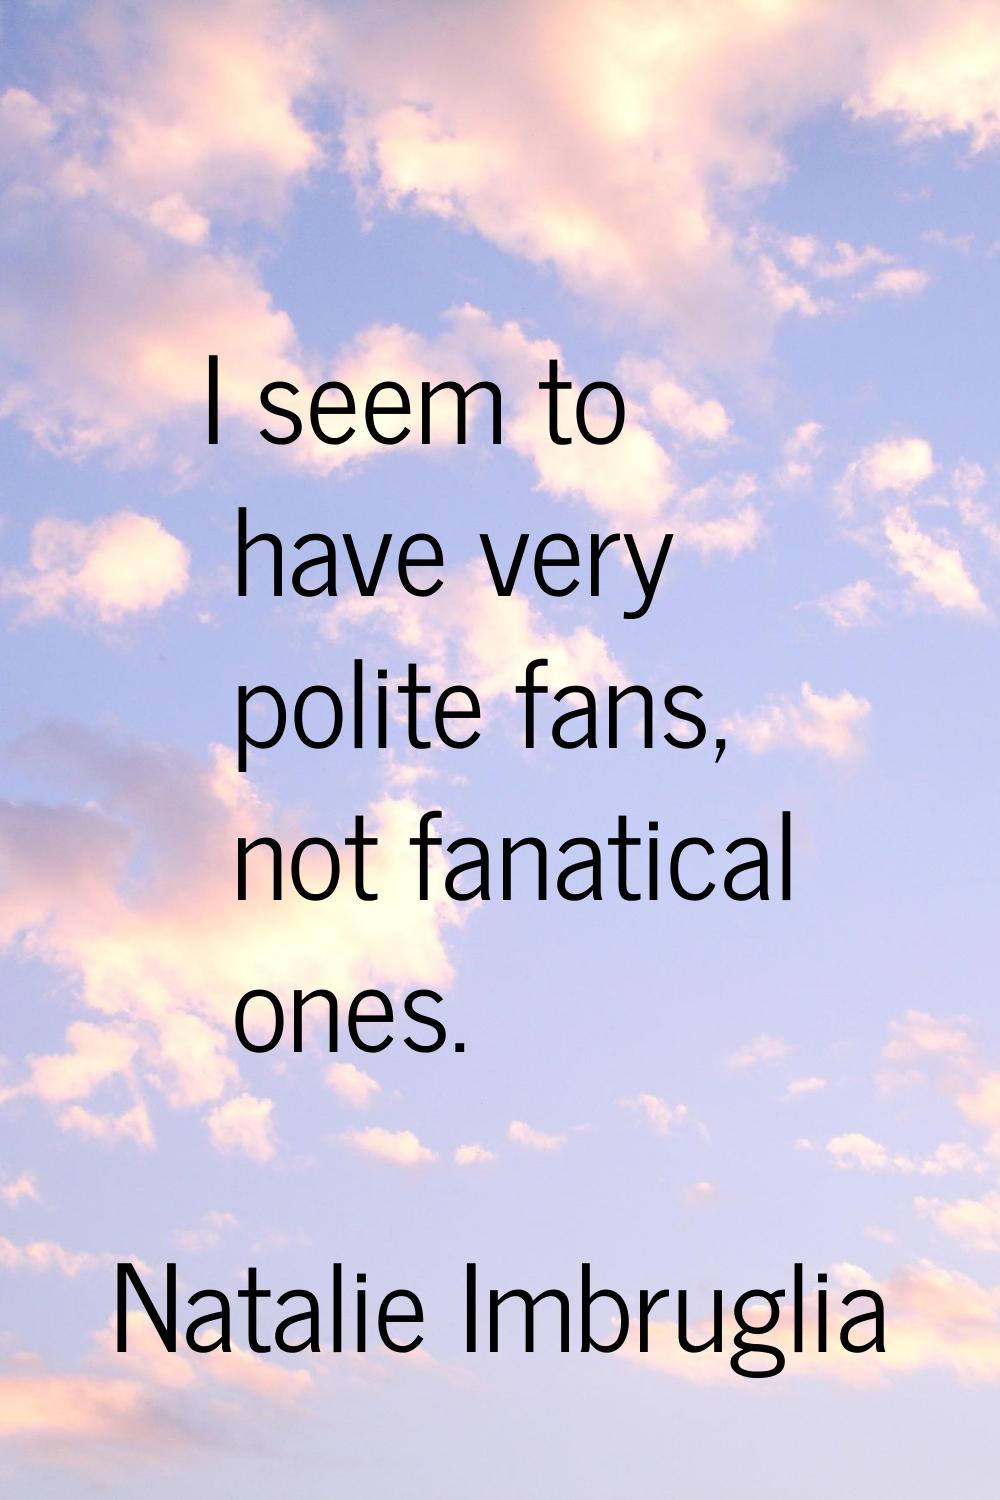 I seem to have very polite fans, not fanatical ones.